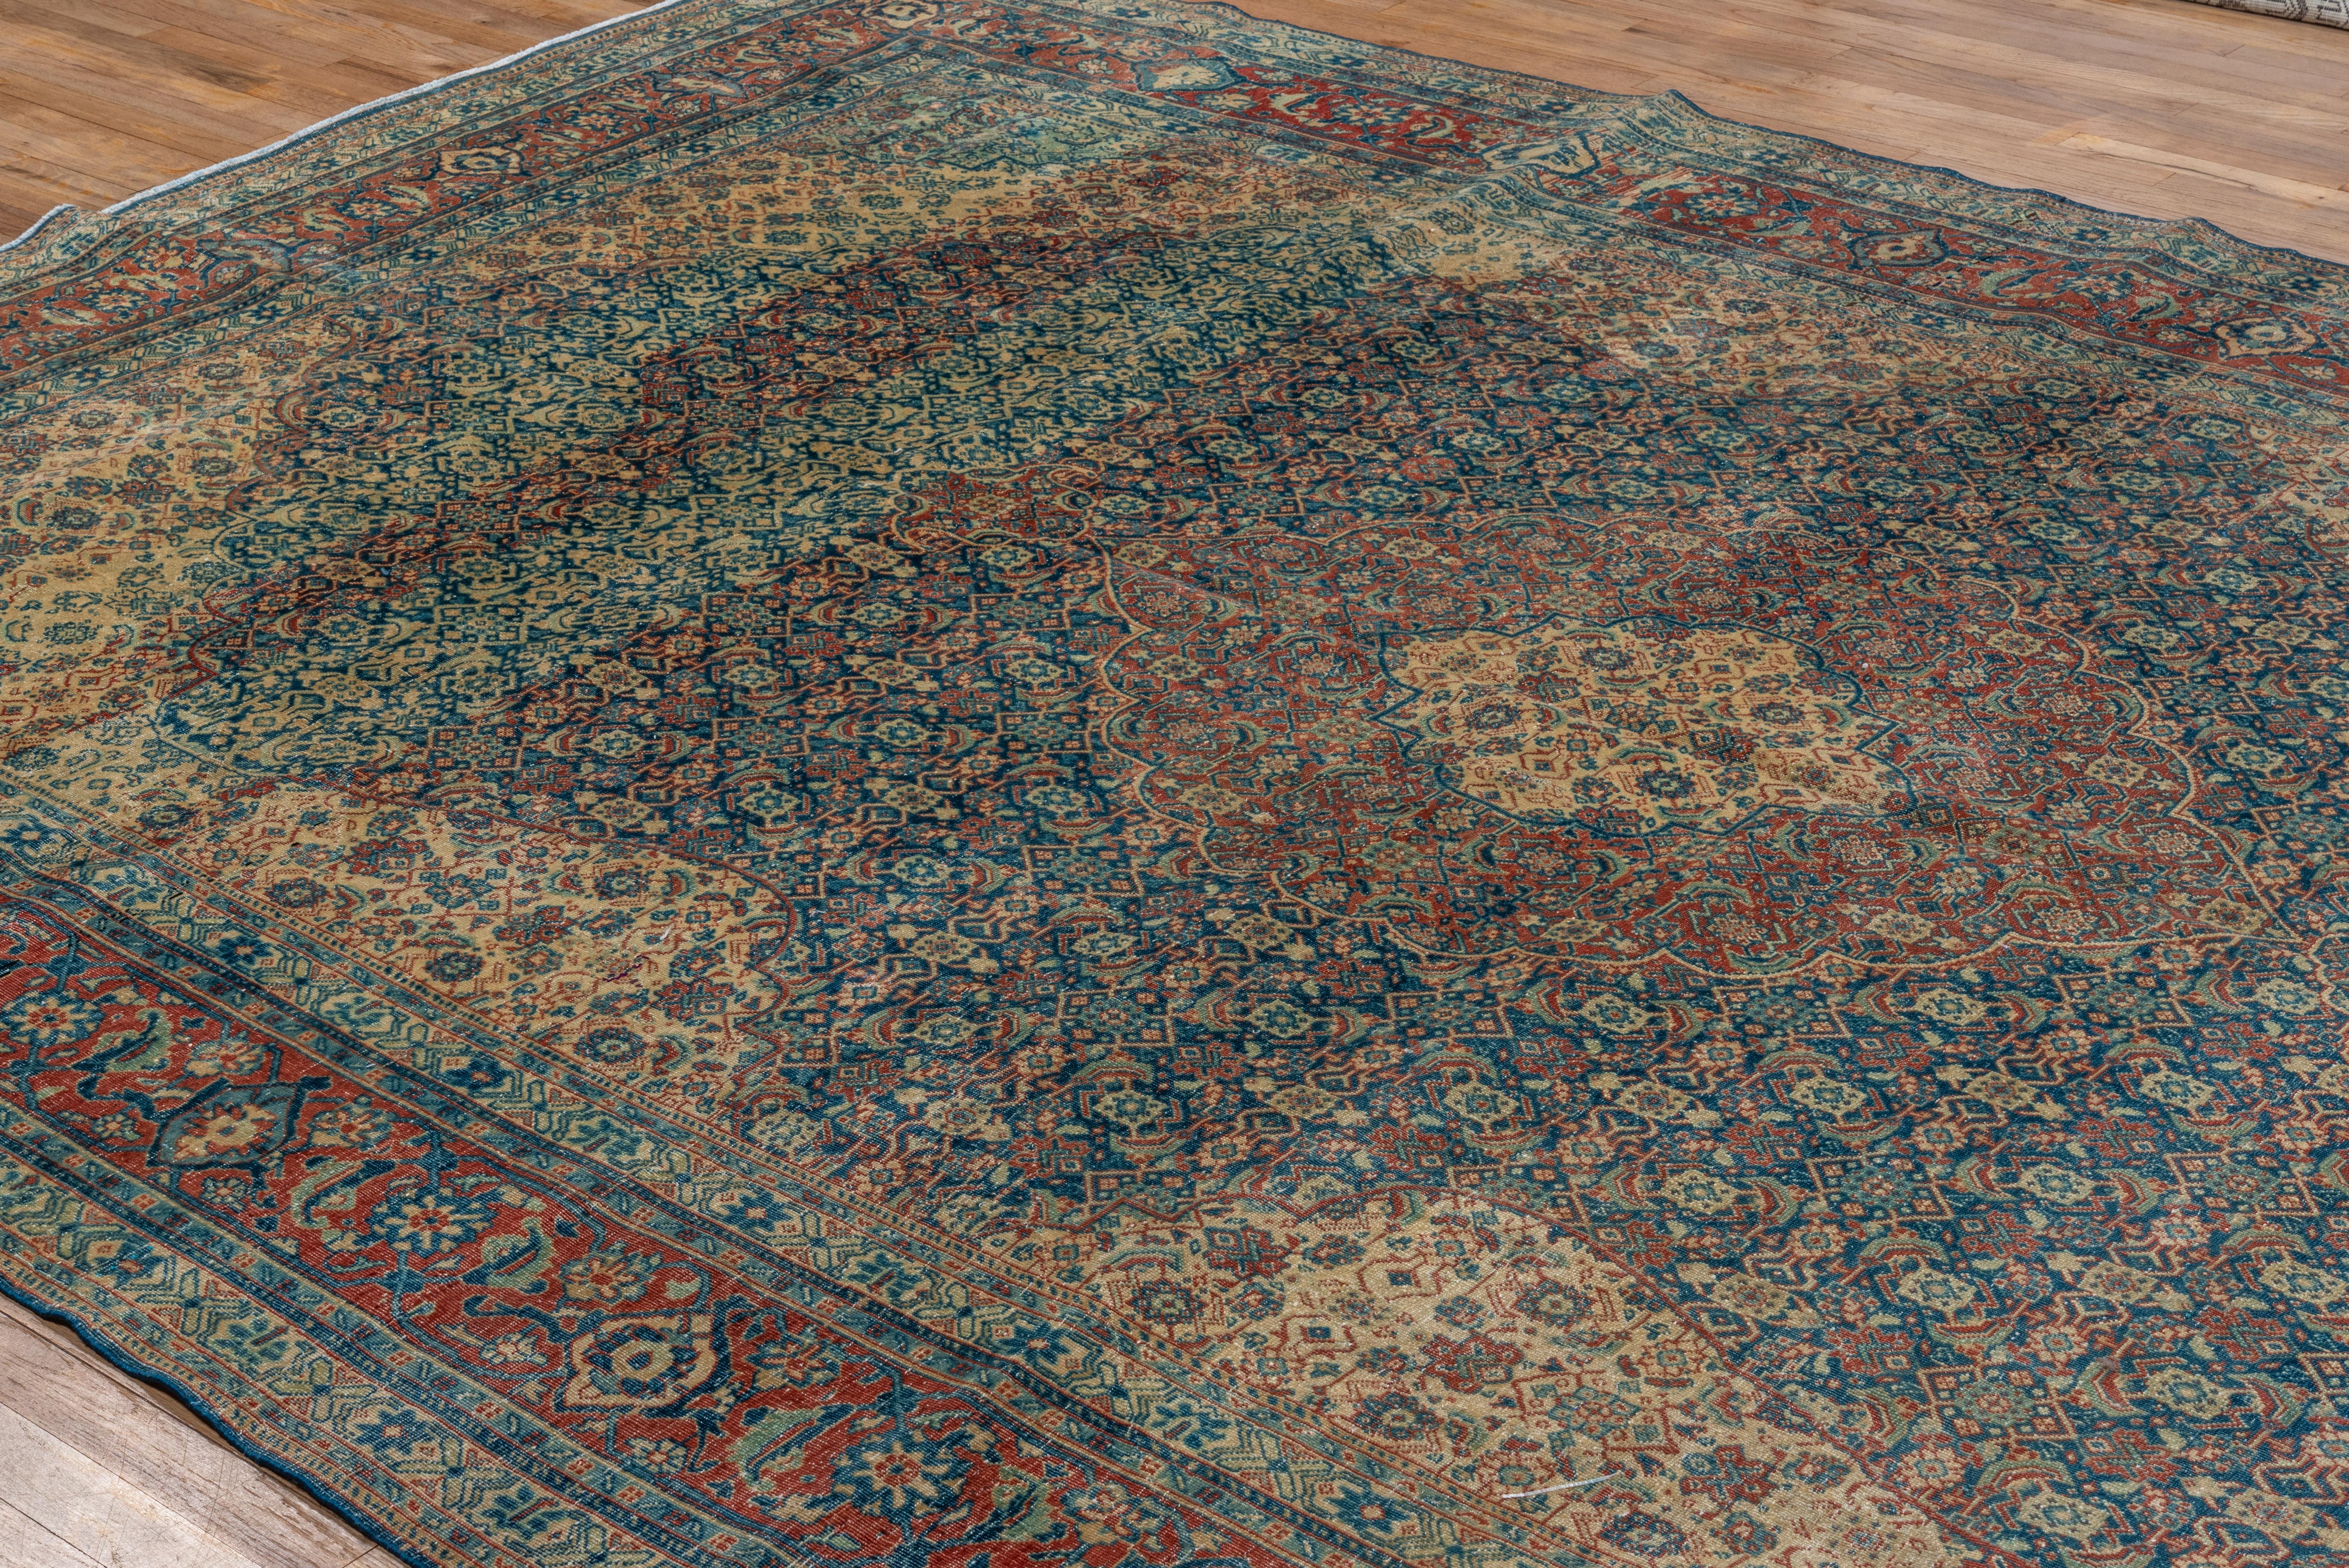 Features This well-woven city carpet in the general 